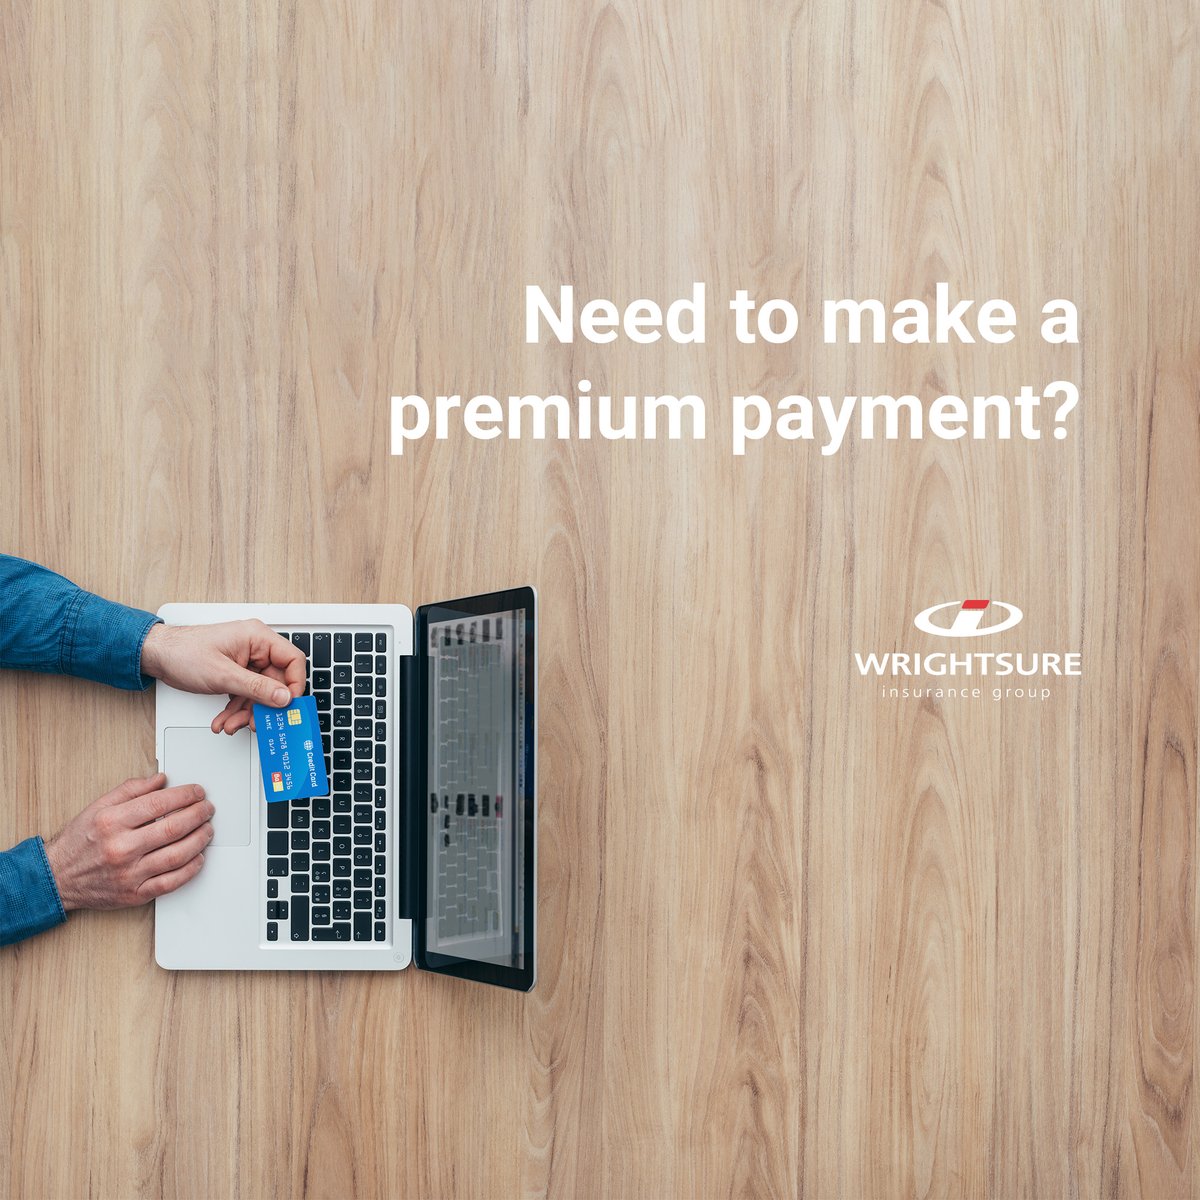 Making your premium payment with Wrightsure is quick and convenient. We're here to ensure your insurance coverage remains uninterrupted.

Pay your premium now: wrightsure.com/premium-payment 
#InsurancePremium #SecurePayment #WrightsureInsurance